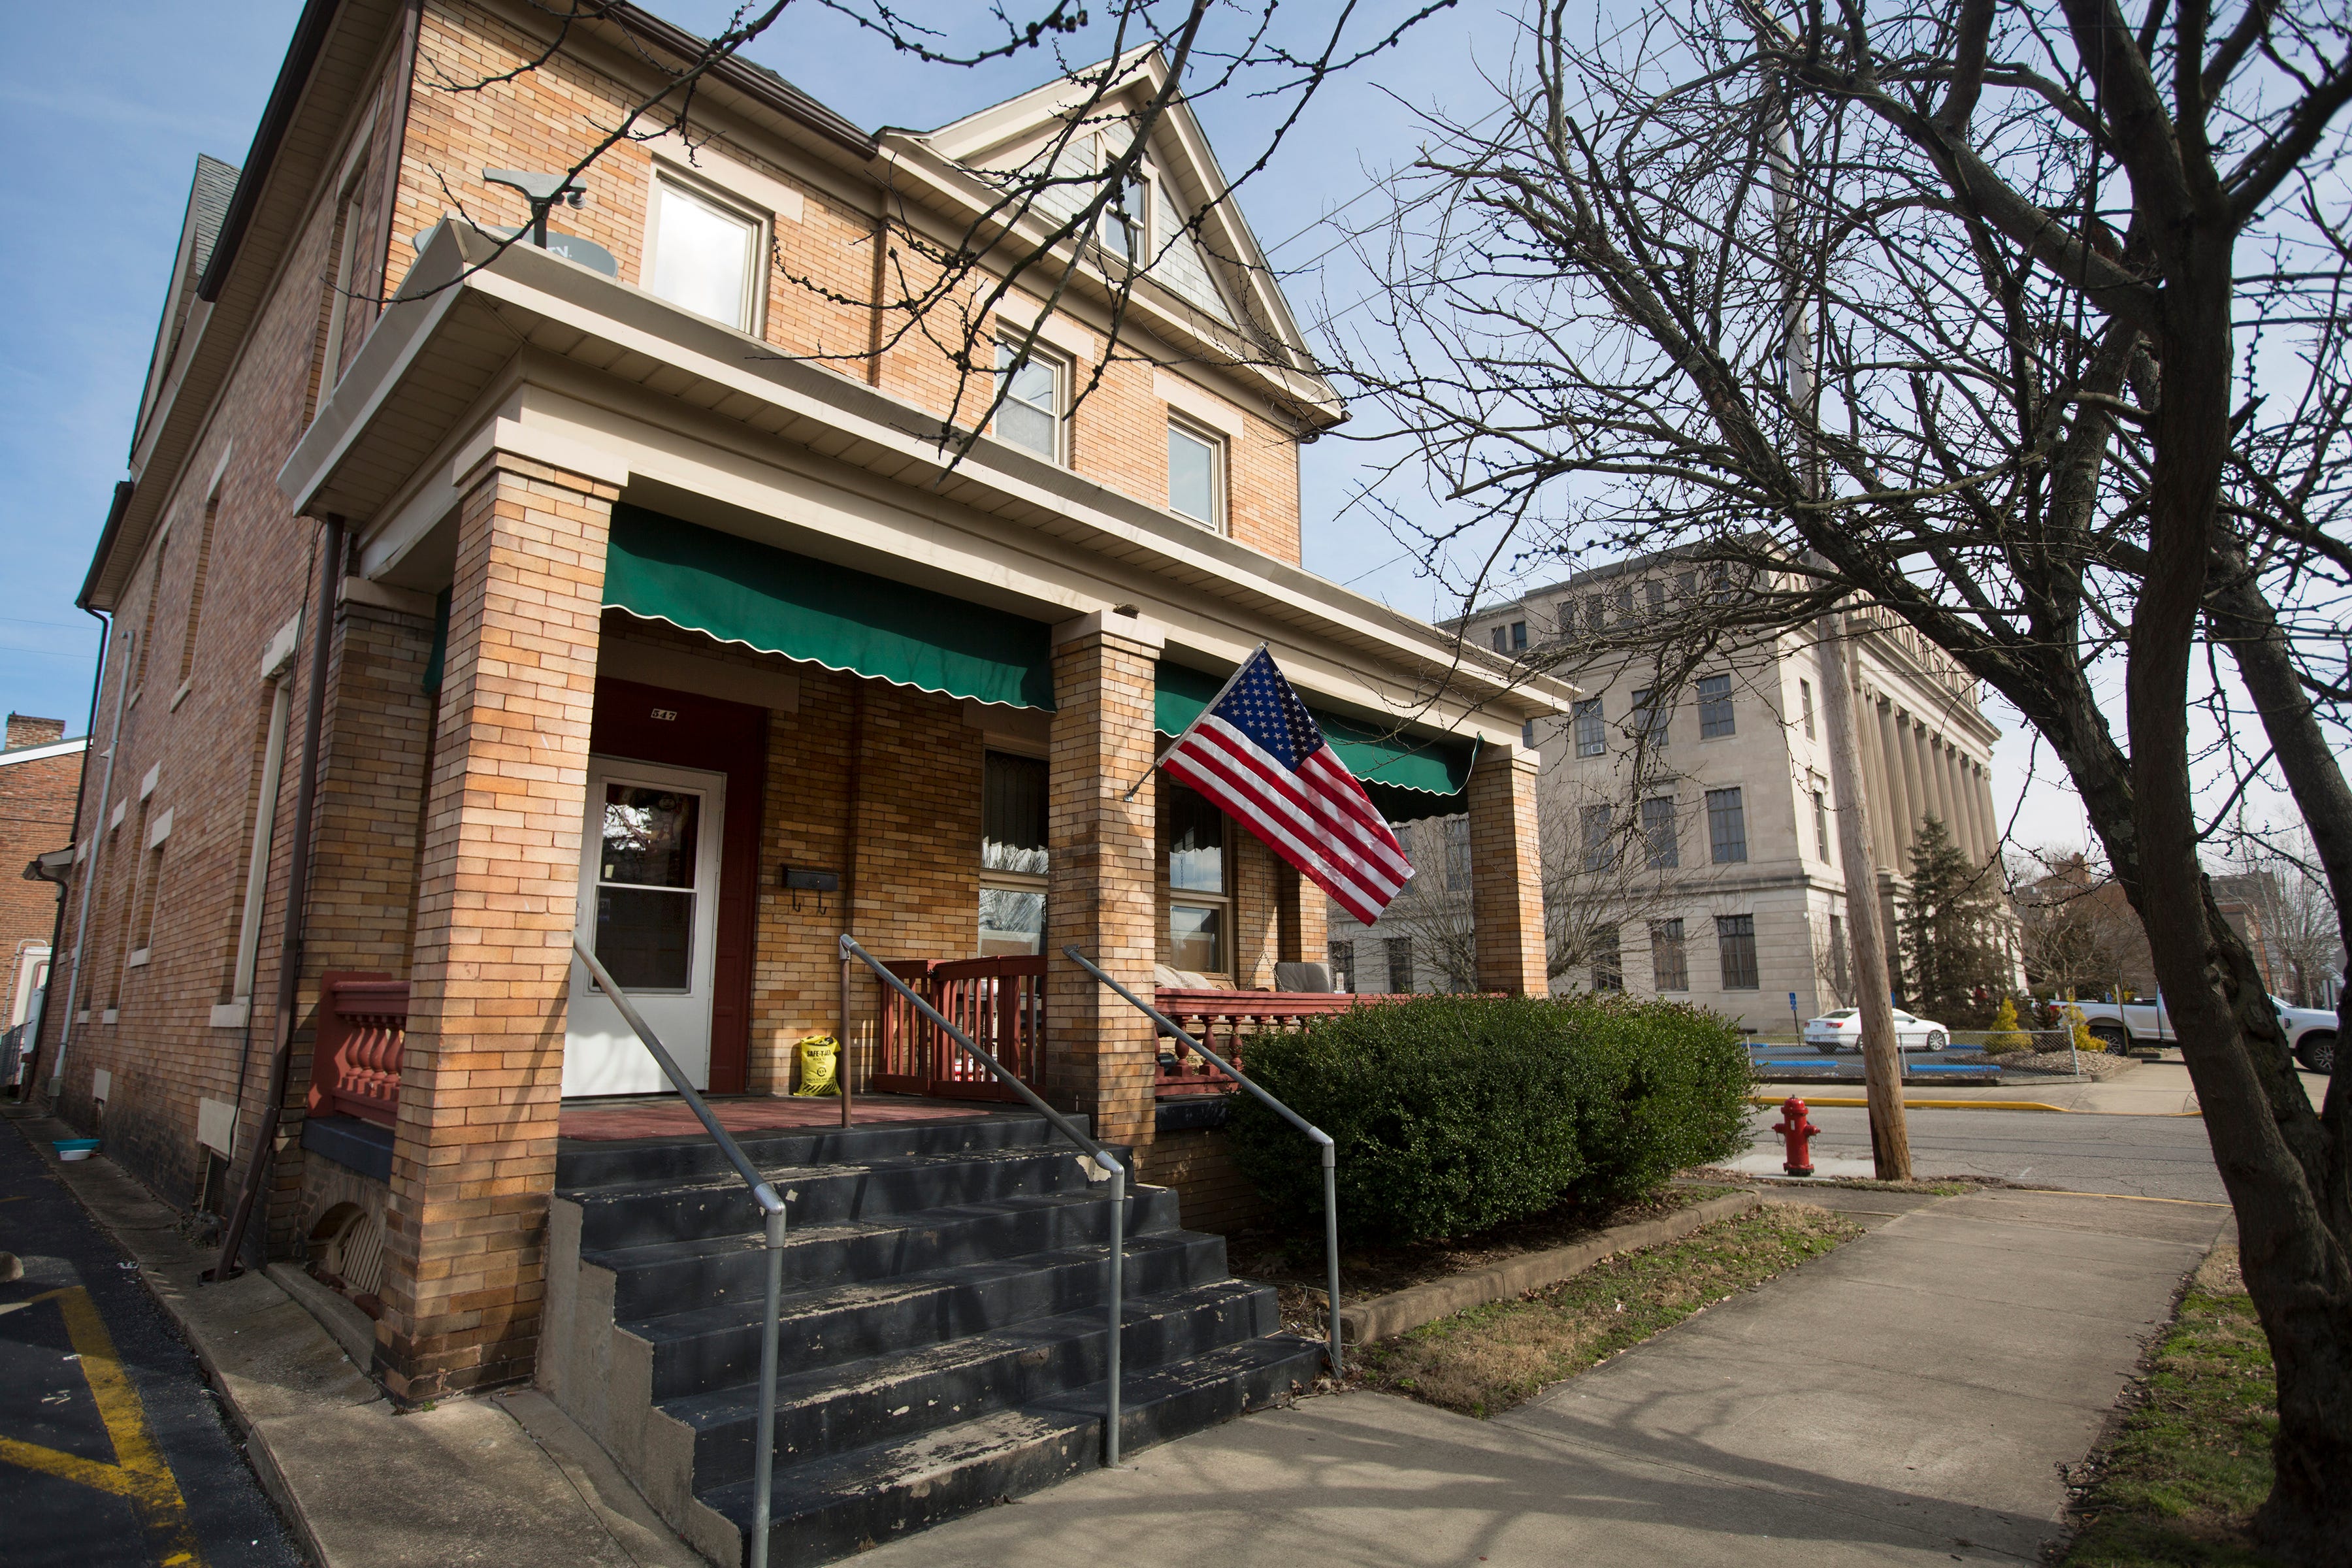 Michael Mearan's home and law office sits conveniently next to the Scioto County Courthouse.